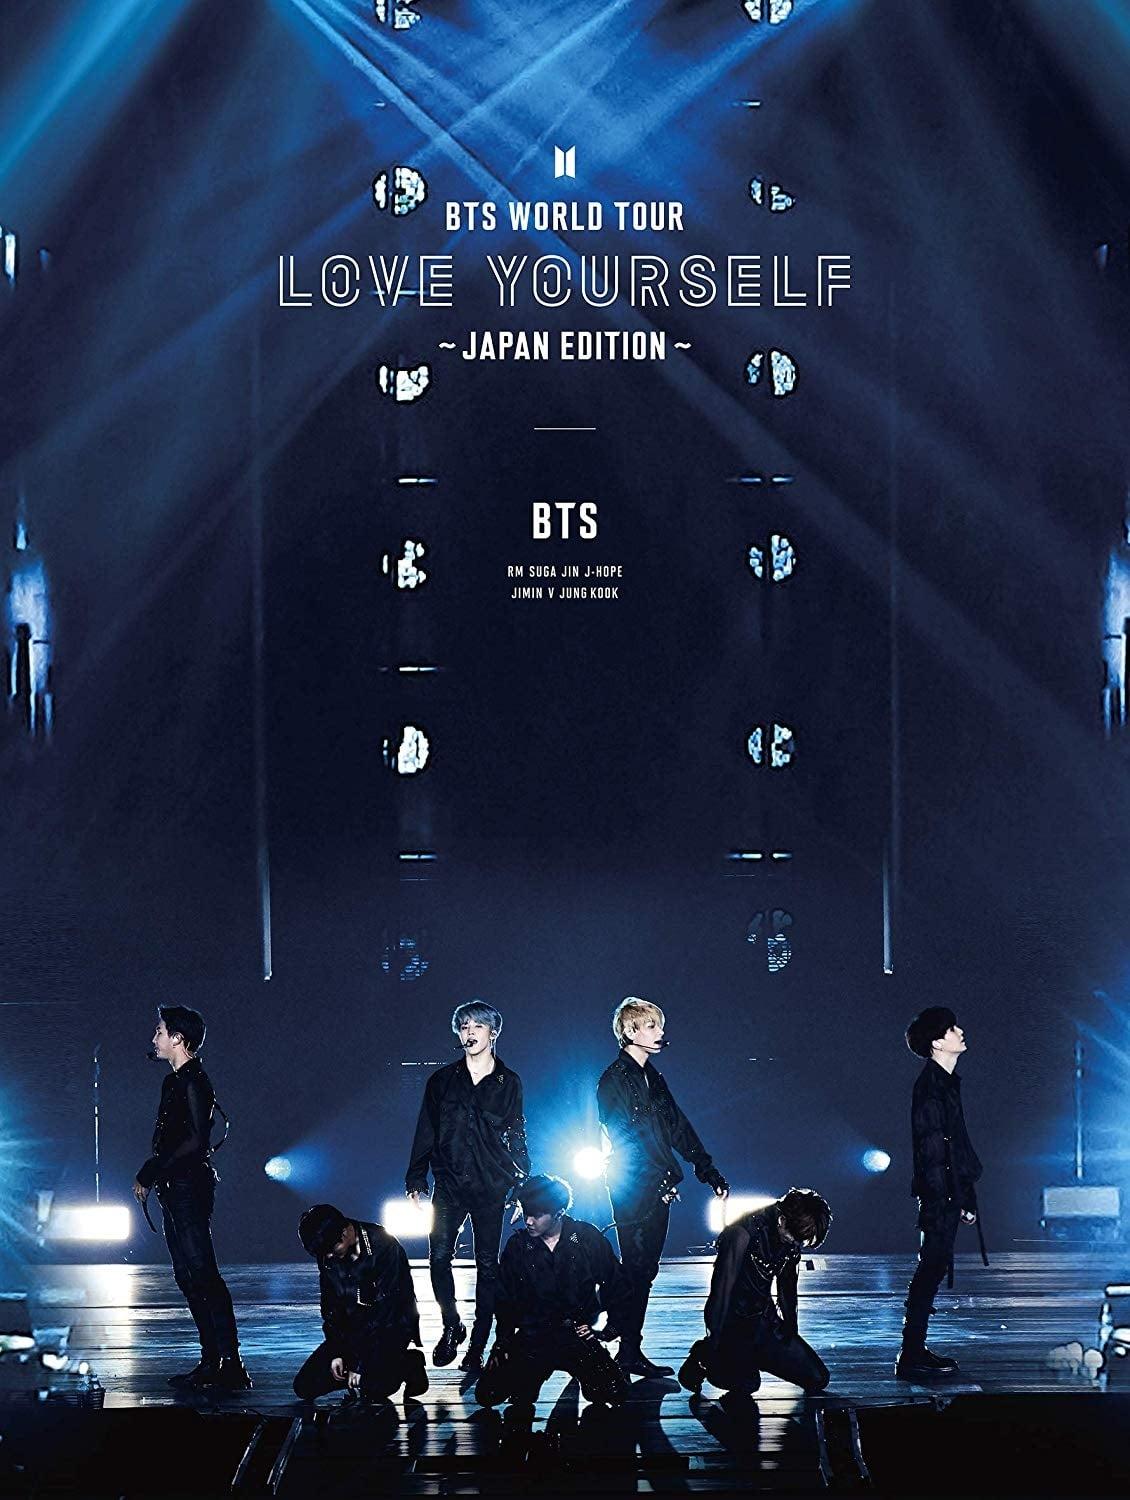 BTS World Tour: Love Yourself - Japan Edition poster